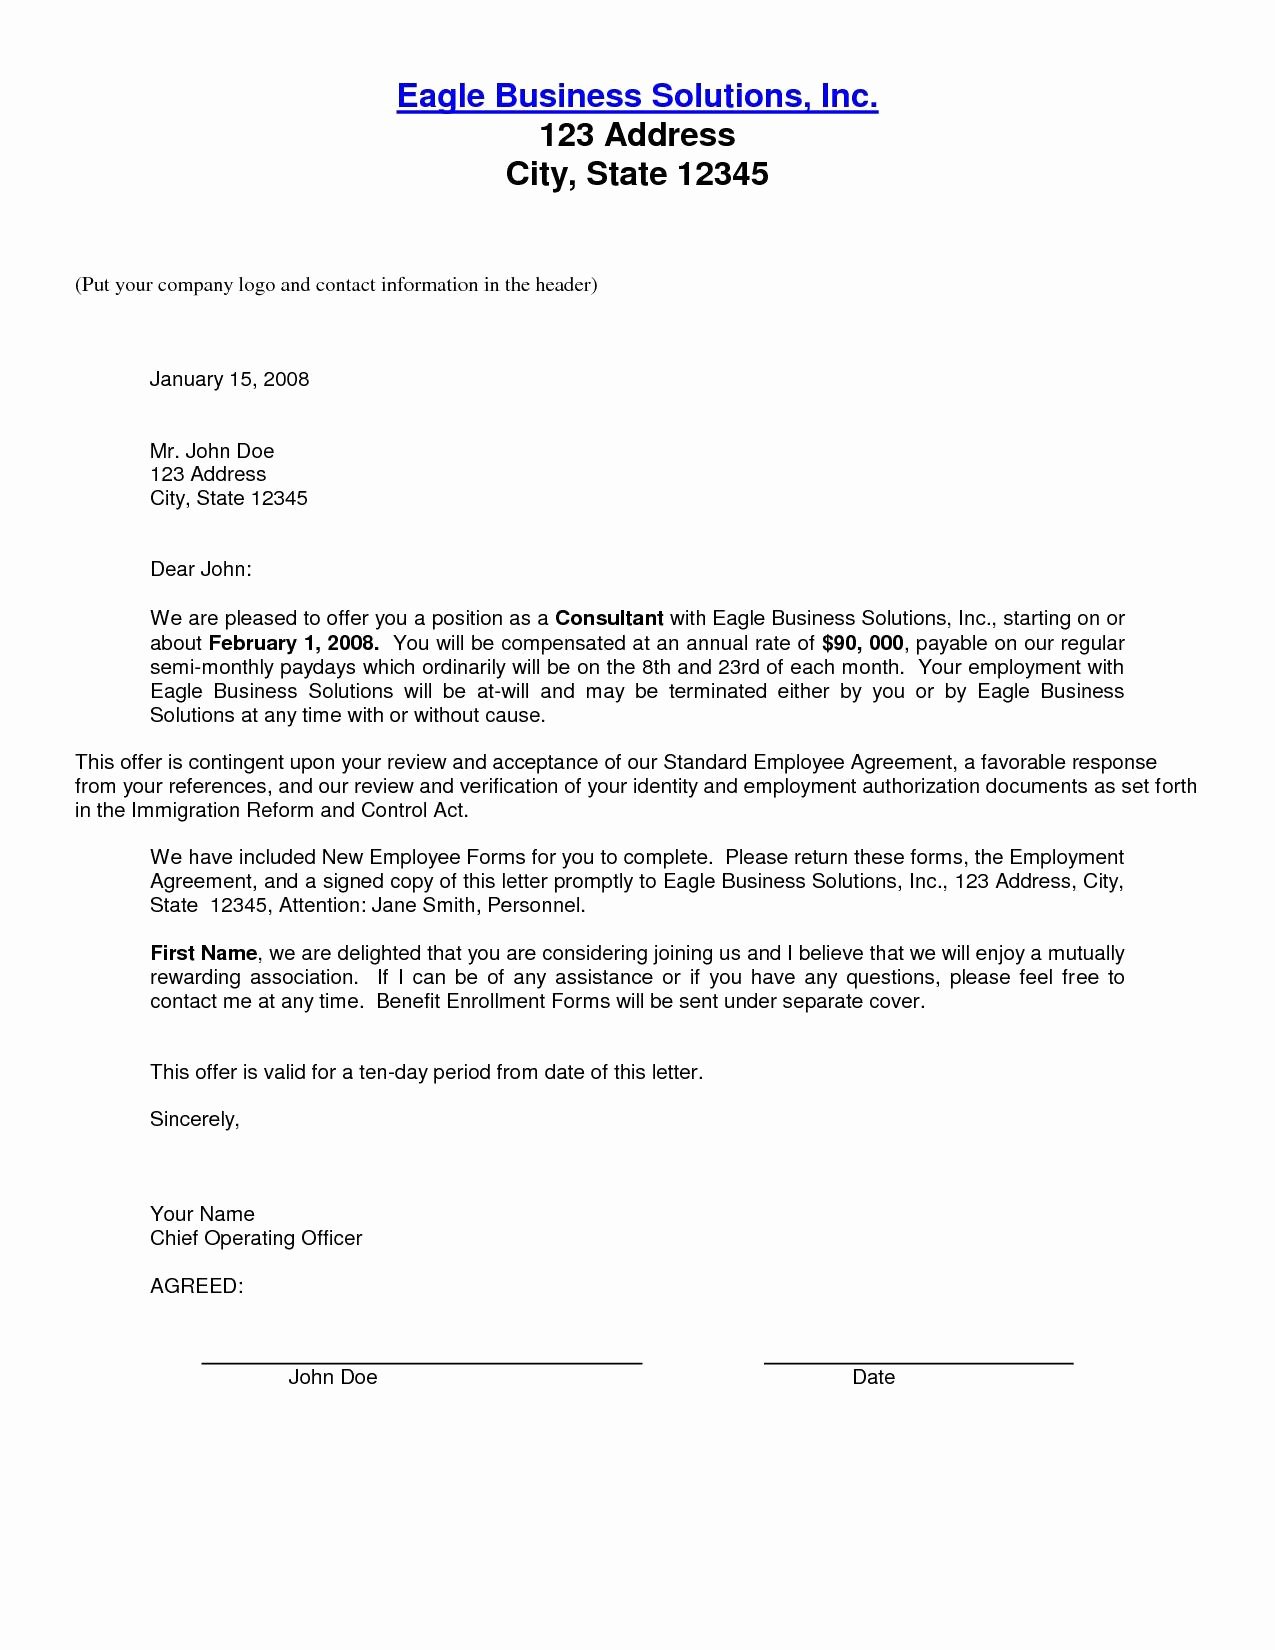 Home Buying Offer Letter Template Best Of Home Purchase Fer Letter Template Samples